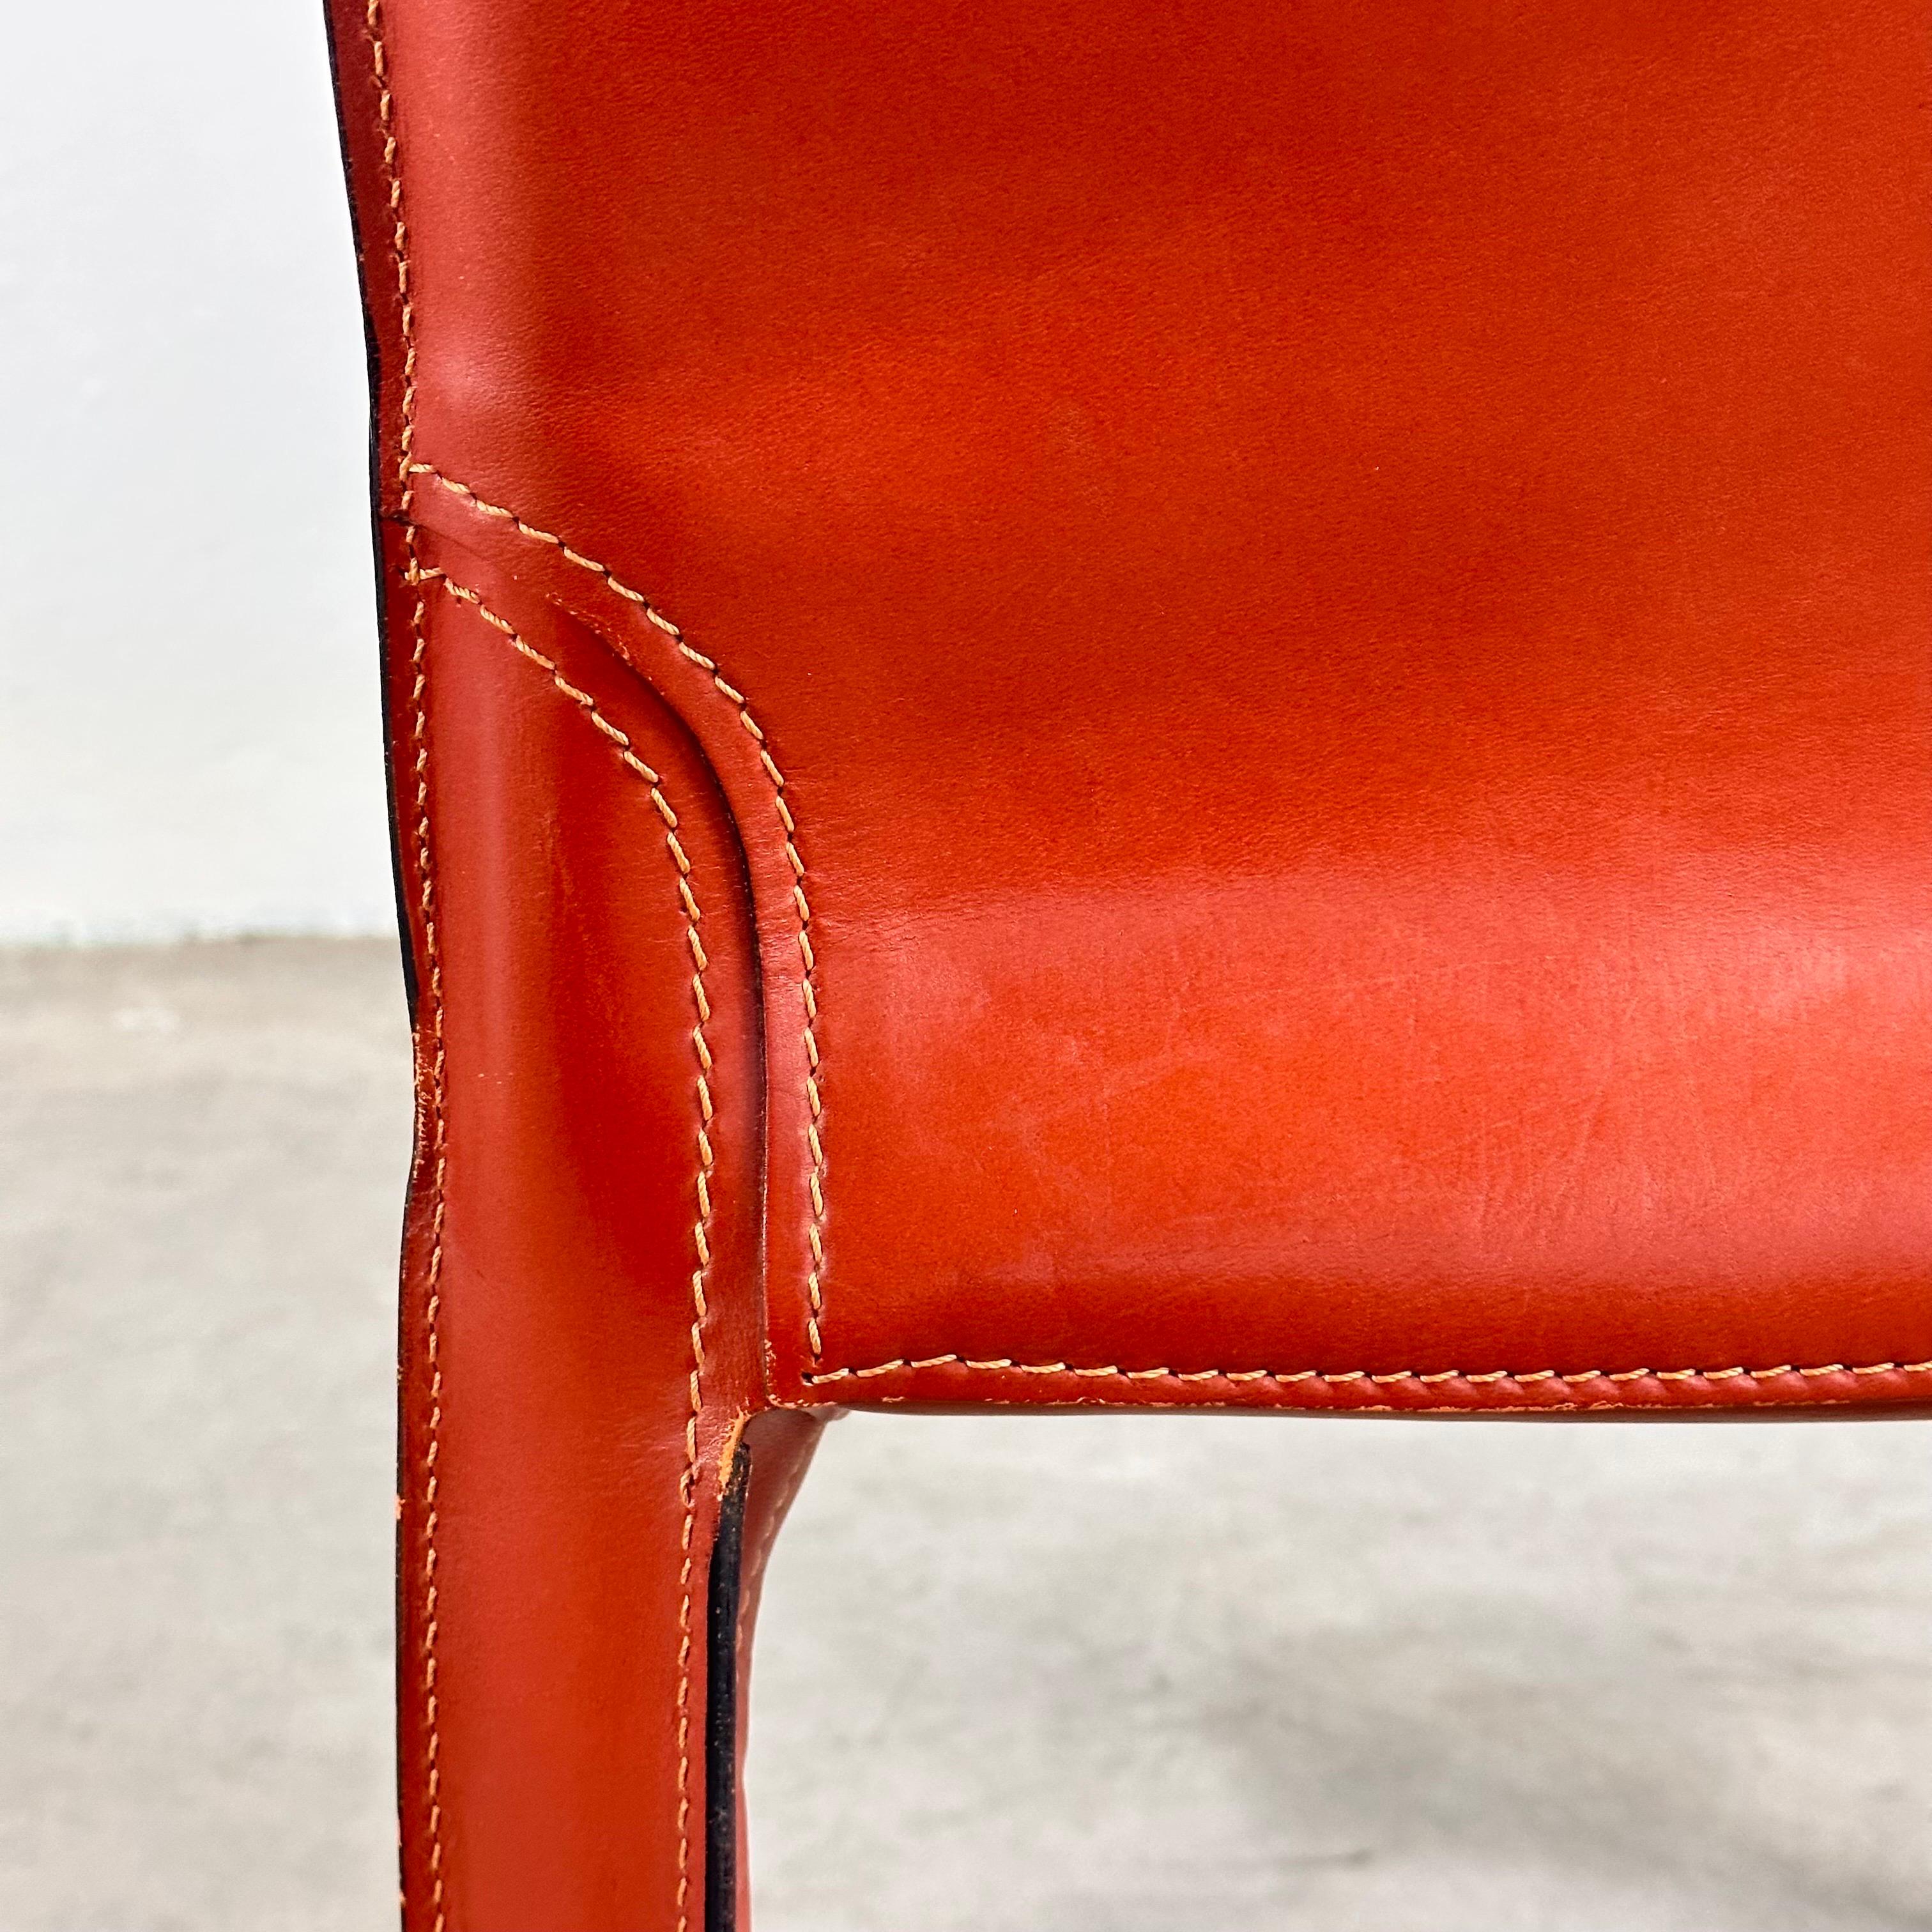 Pair CAB 412 Chairs by Mario Bellini for Cassina in Red Leather, 1970s For Sale 7